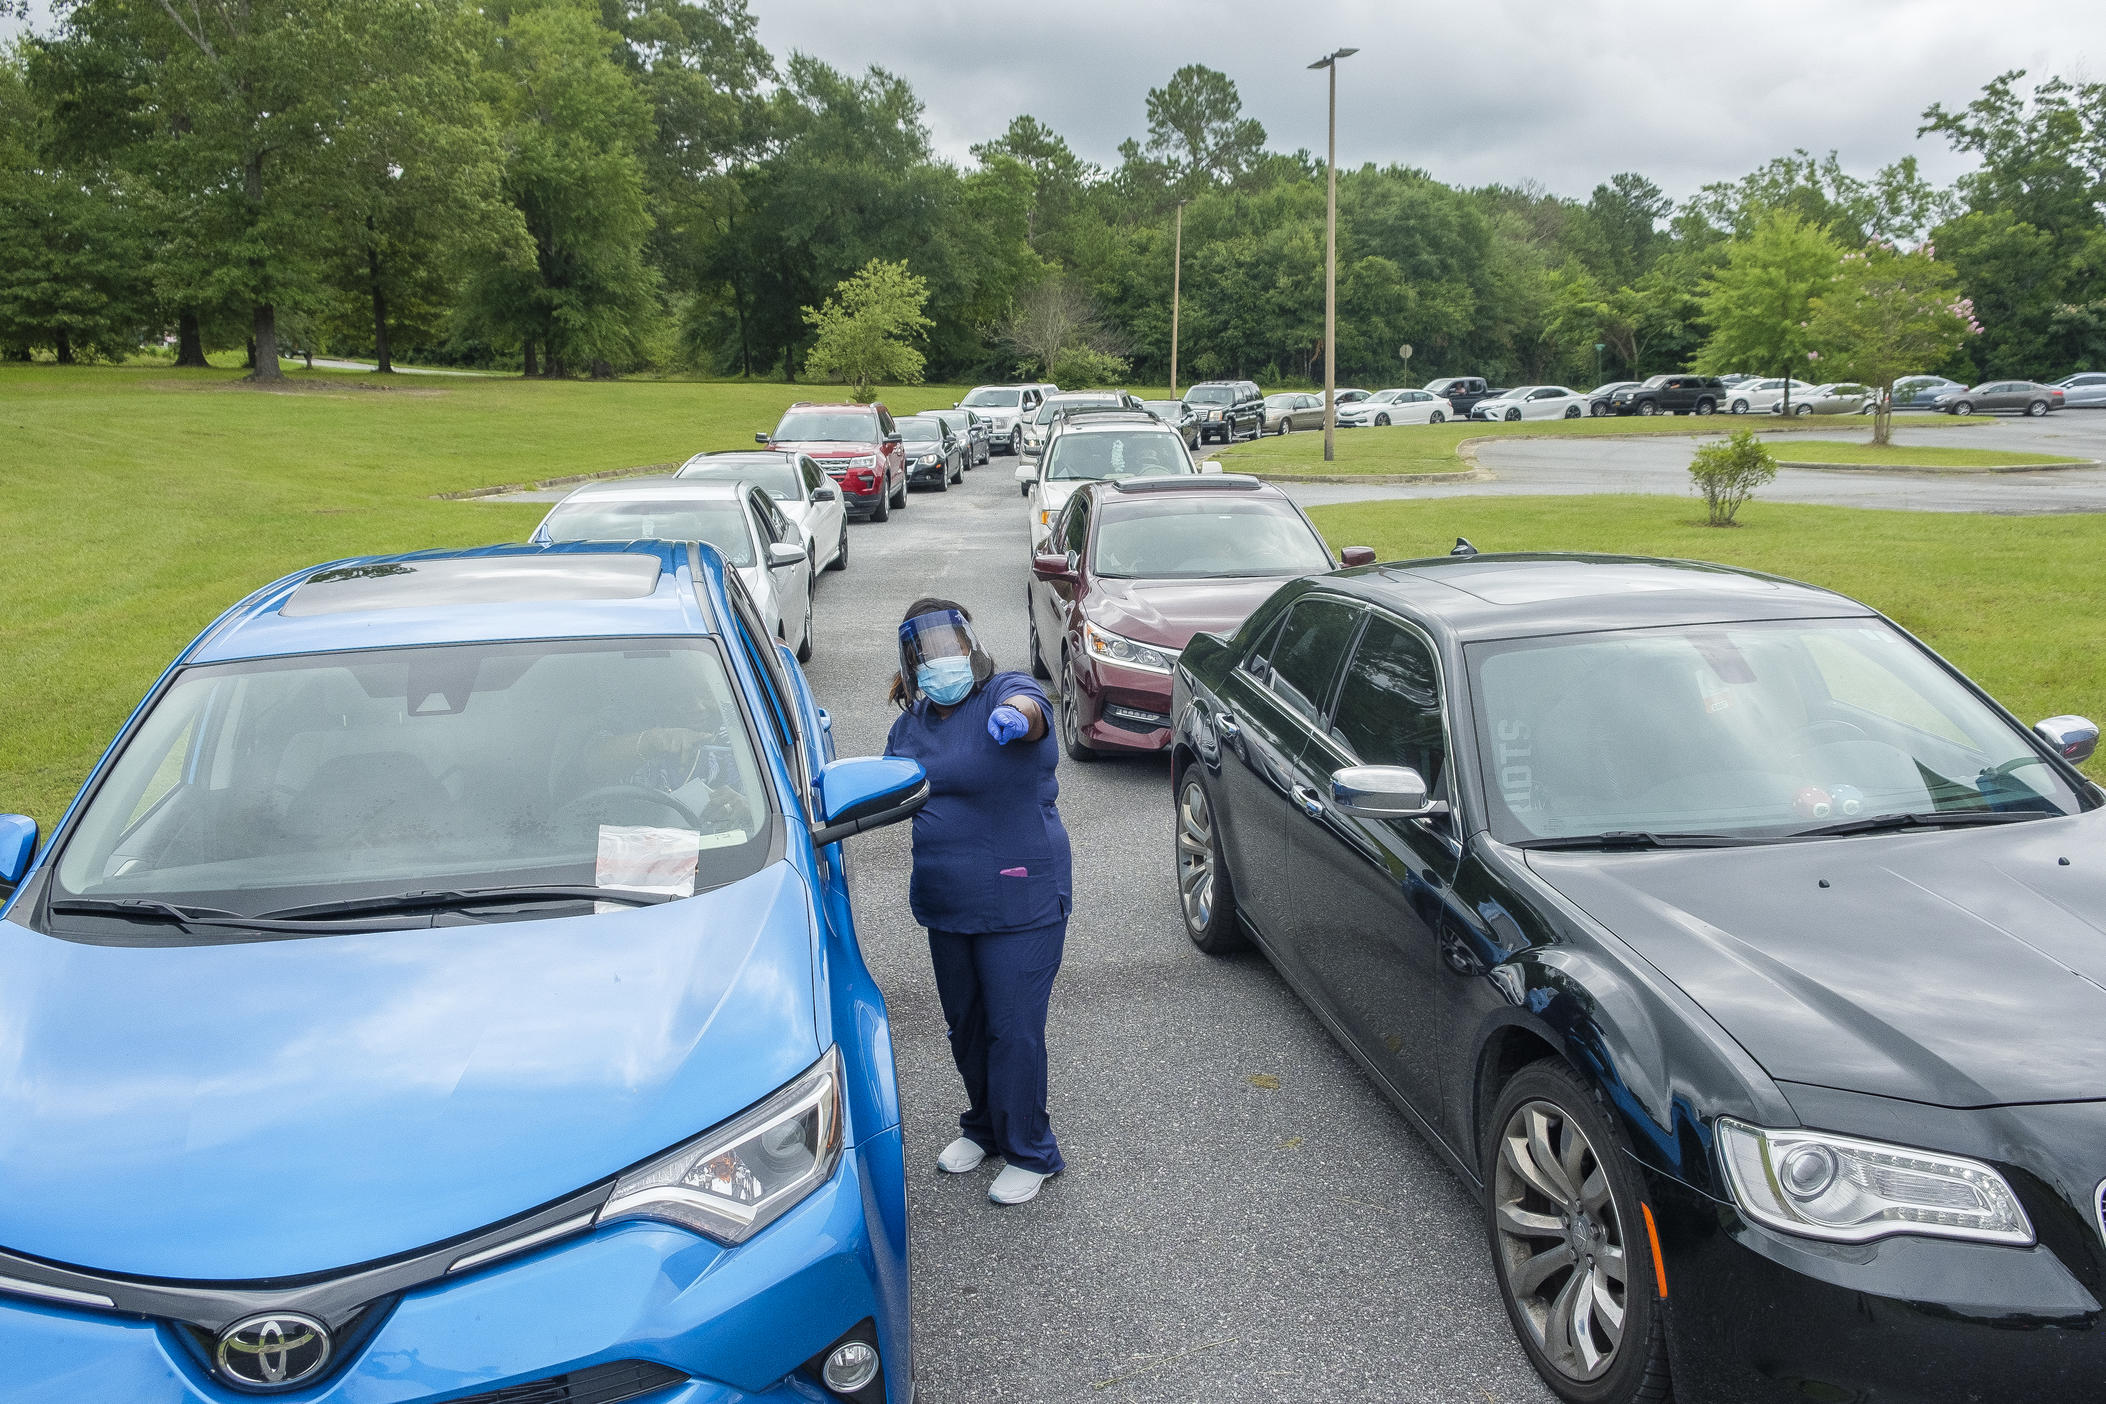 Motorists wait in line for Coronavirus tests at pop up site in Macon